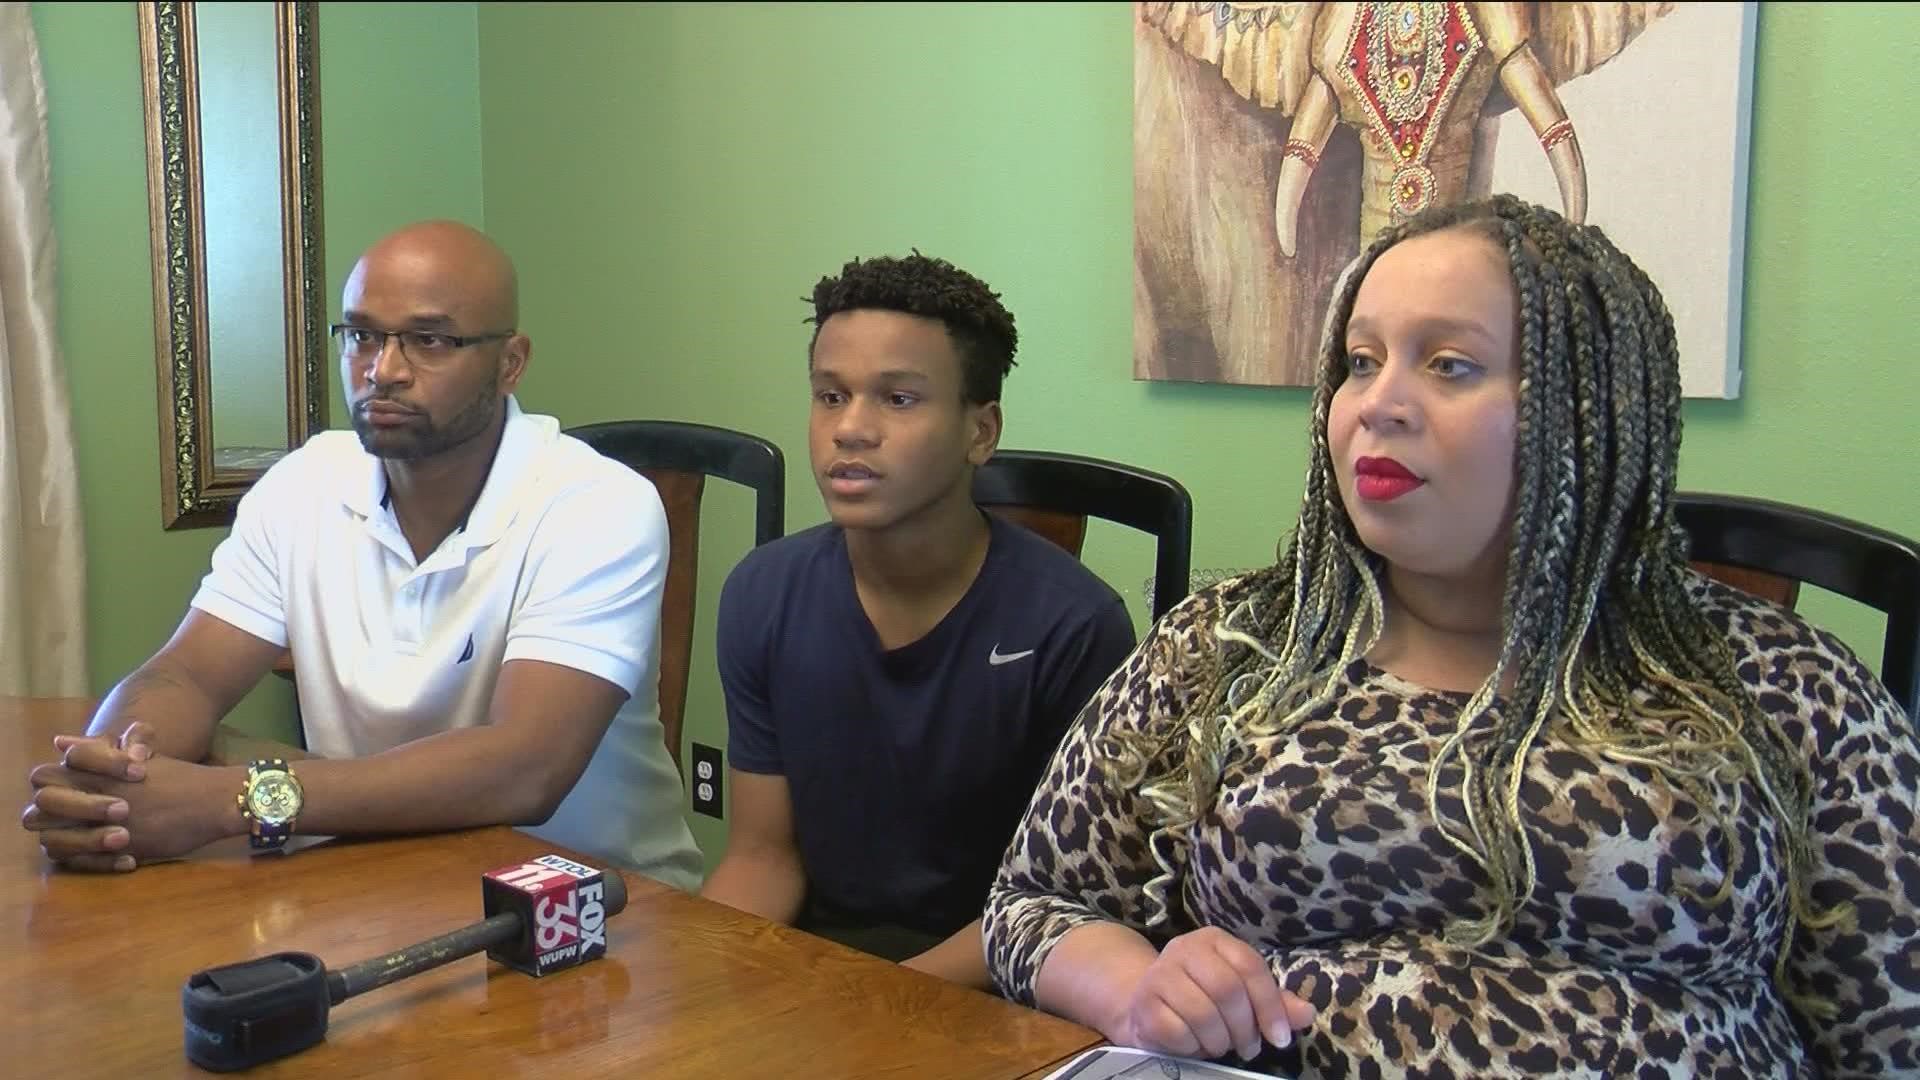 The family of the boy says school officials have not addressed the issue.